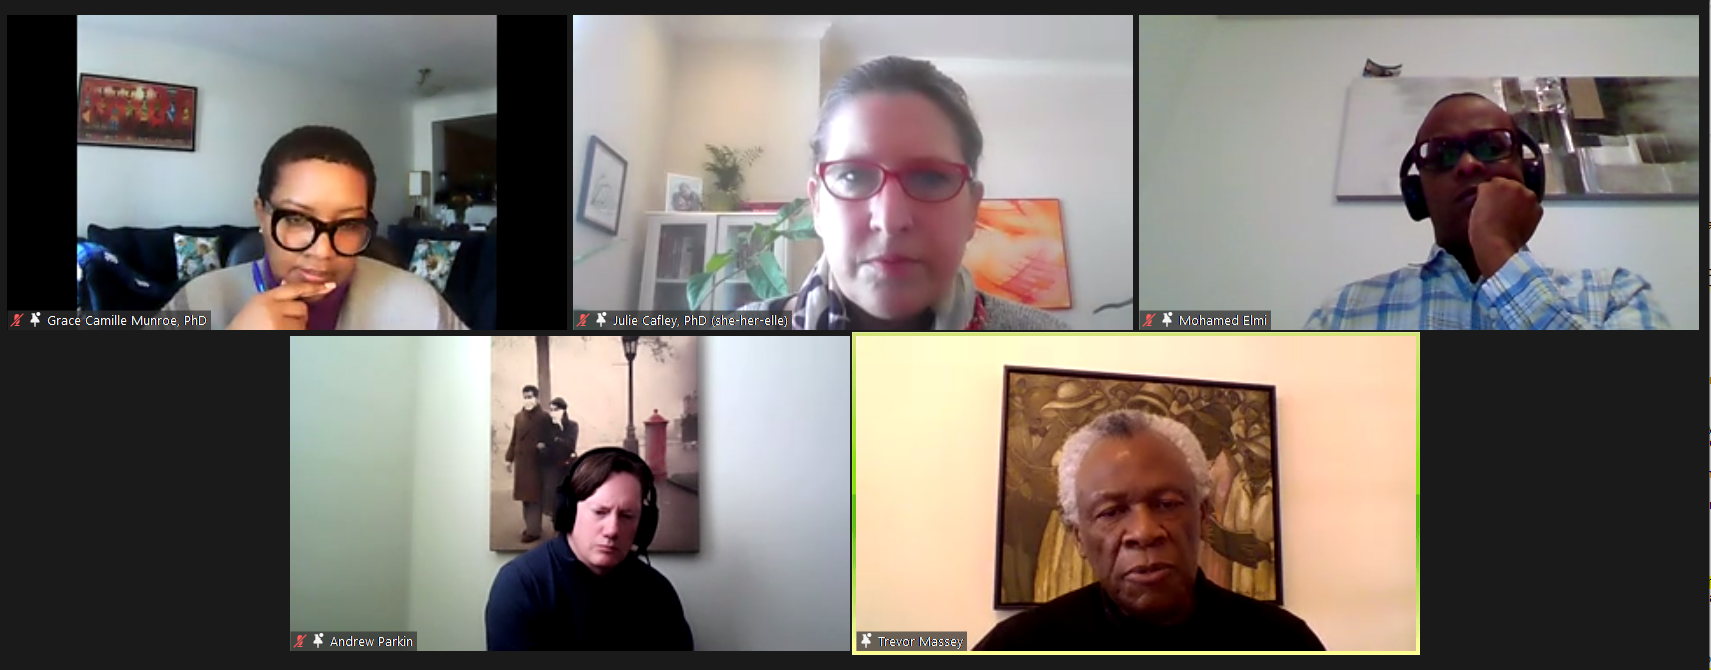 A screenshot taken during the panel discussion, featuring Dr. Grace-Camille Munroe, Dr. Julie Cafley, Dr. Mohamed Elmi, Dr. Andrew Parkin, and Trevor Massey, with Massey speaking